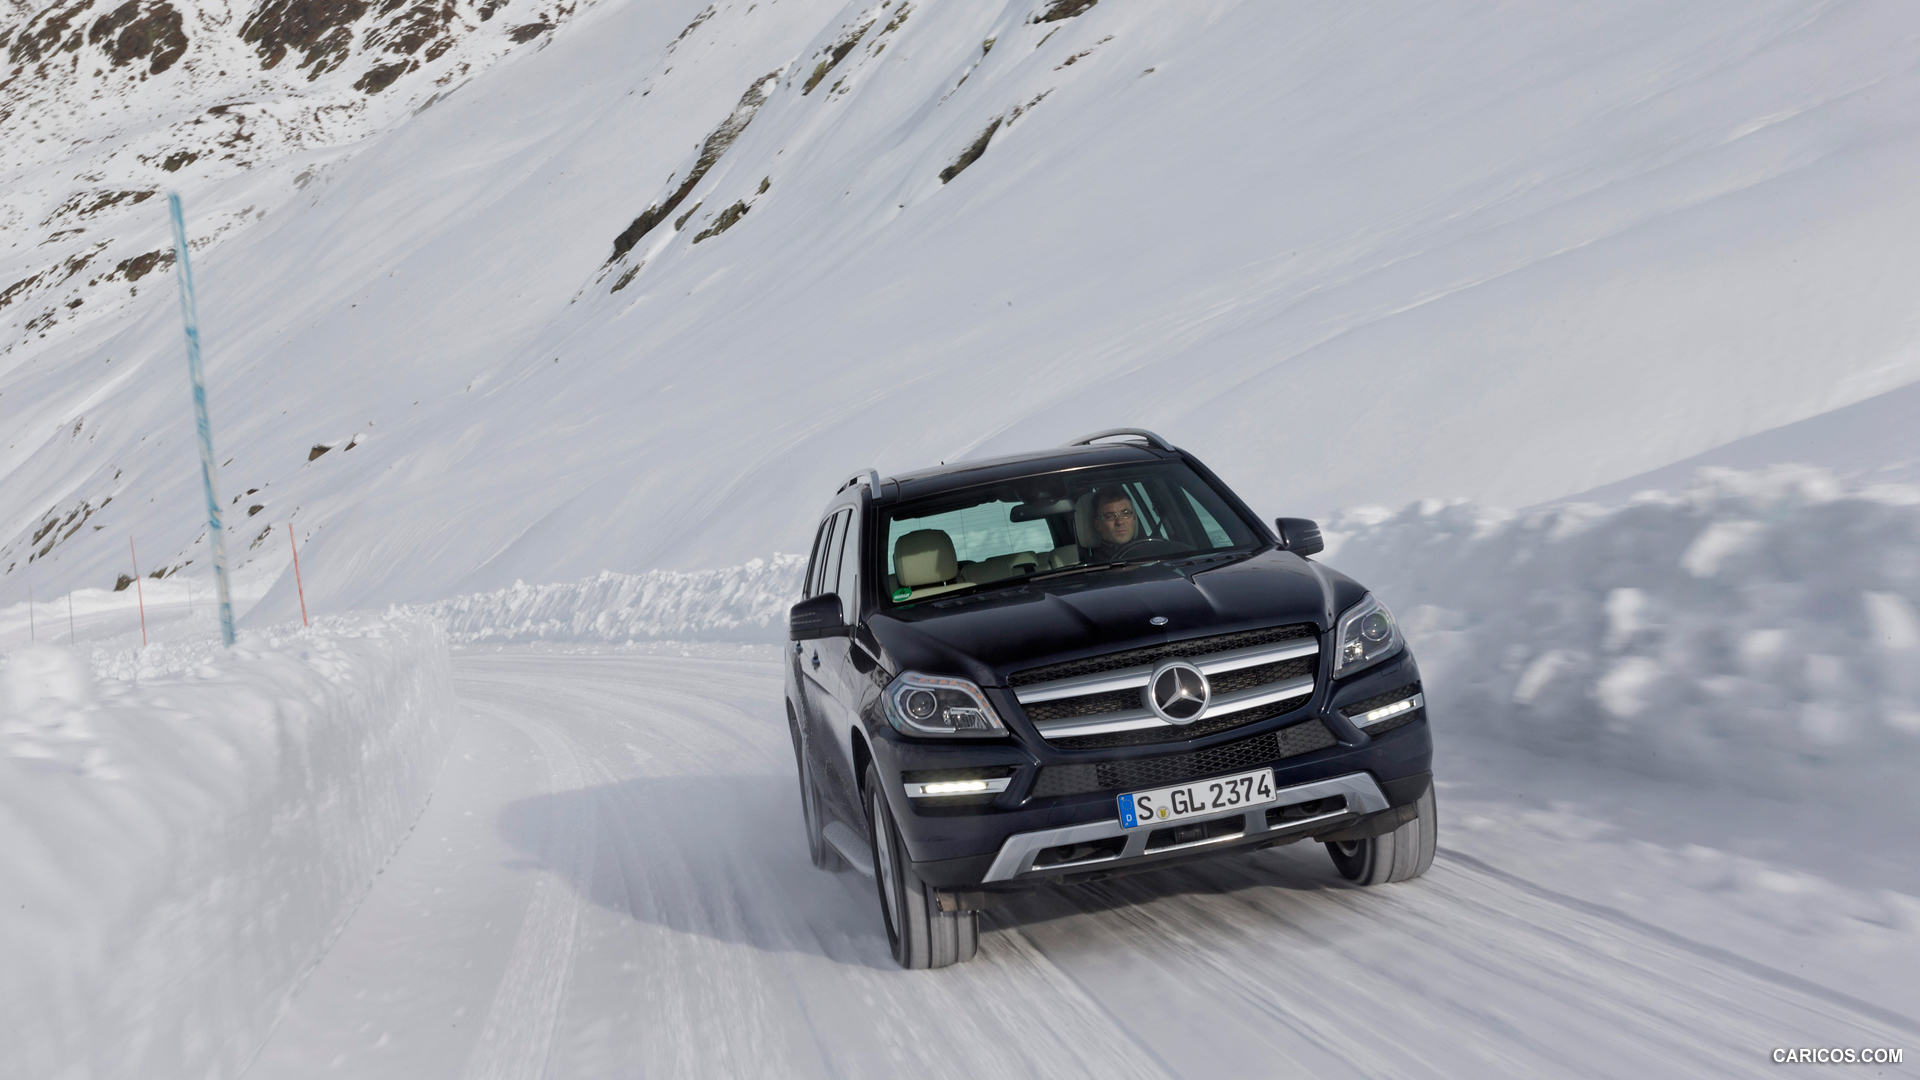 2013 Mercedes-Benz GL 500 4MATIC on Snow - Front, #229 of 259